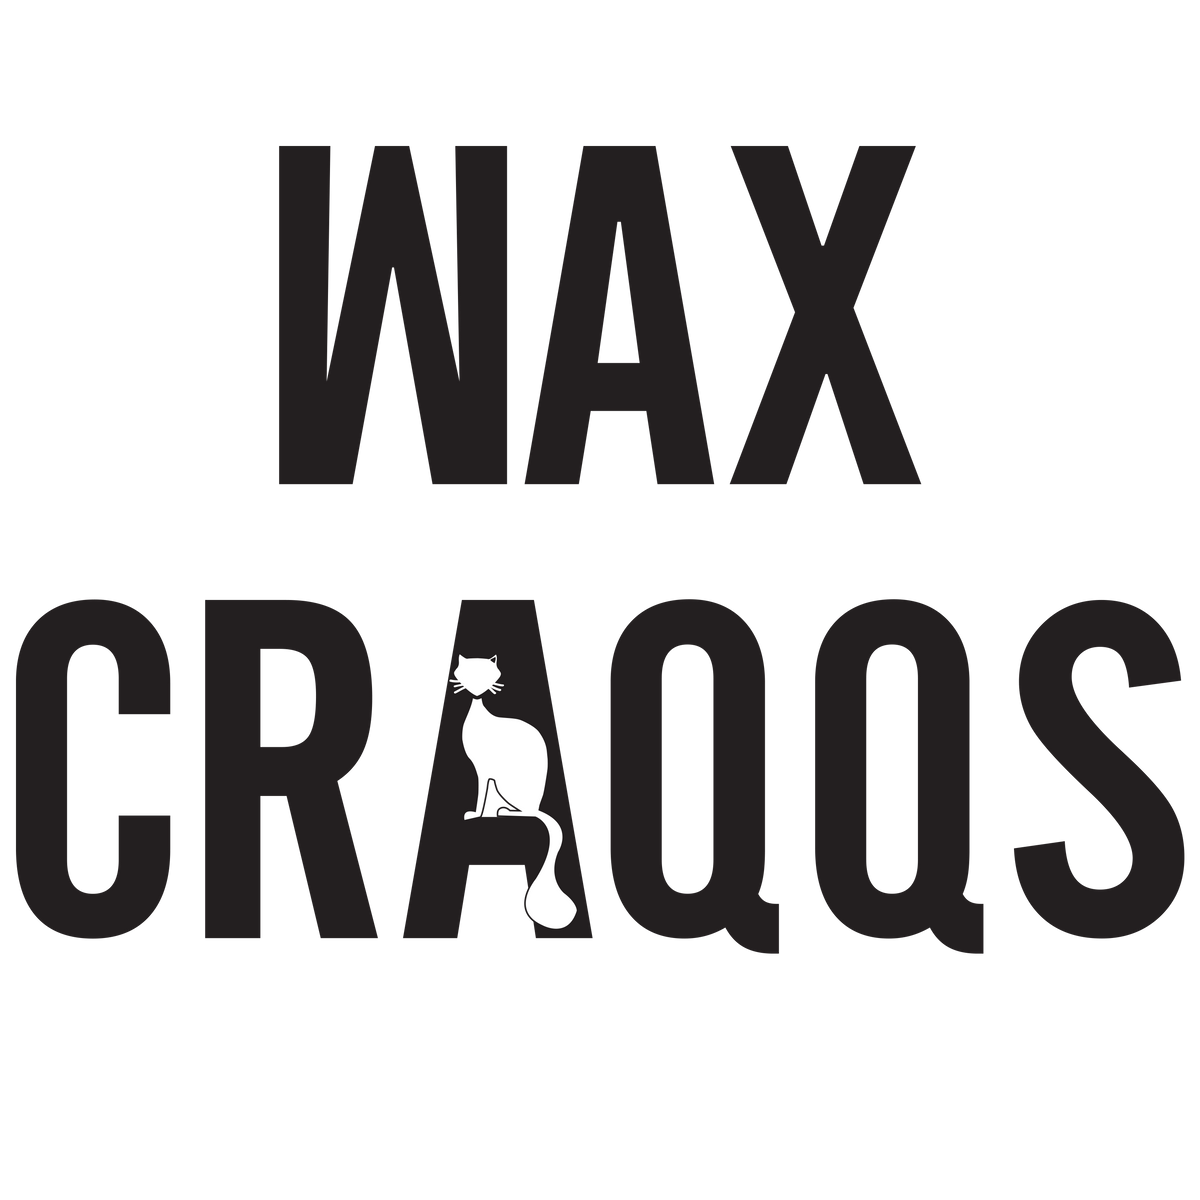 Collections – Wax Craqqs